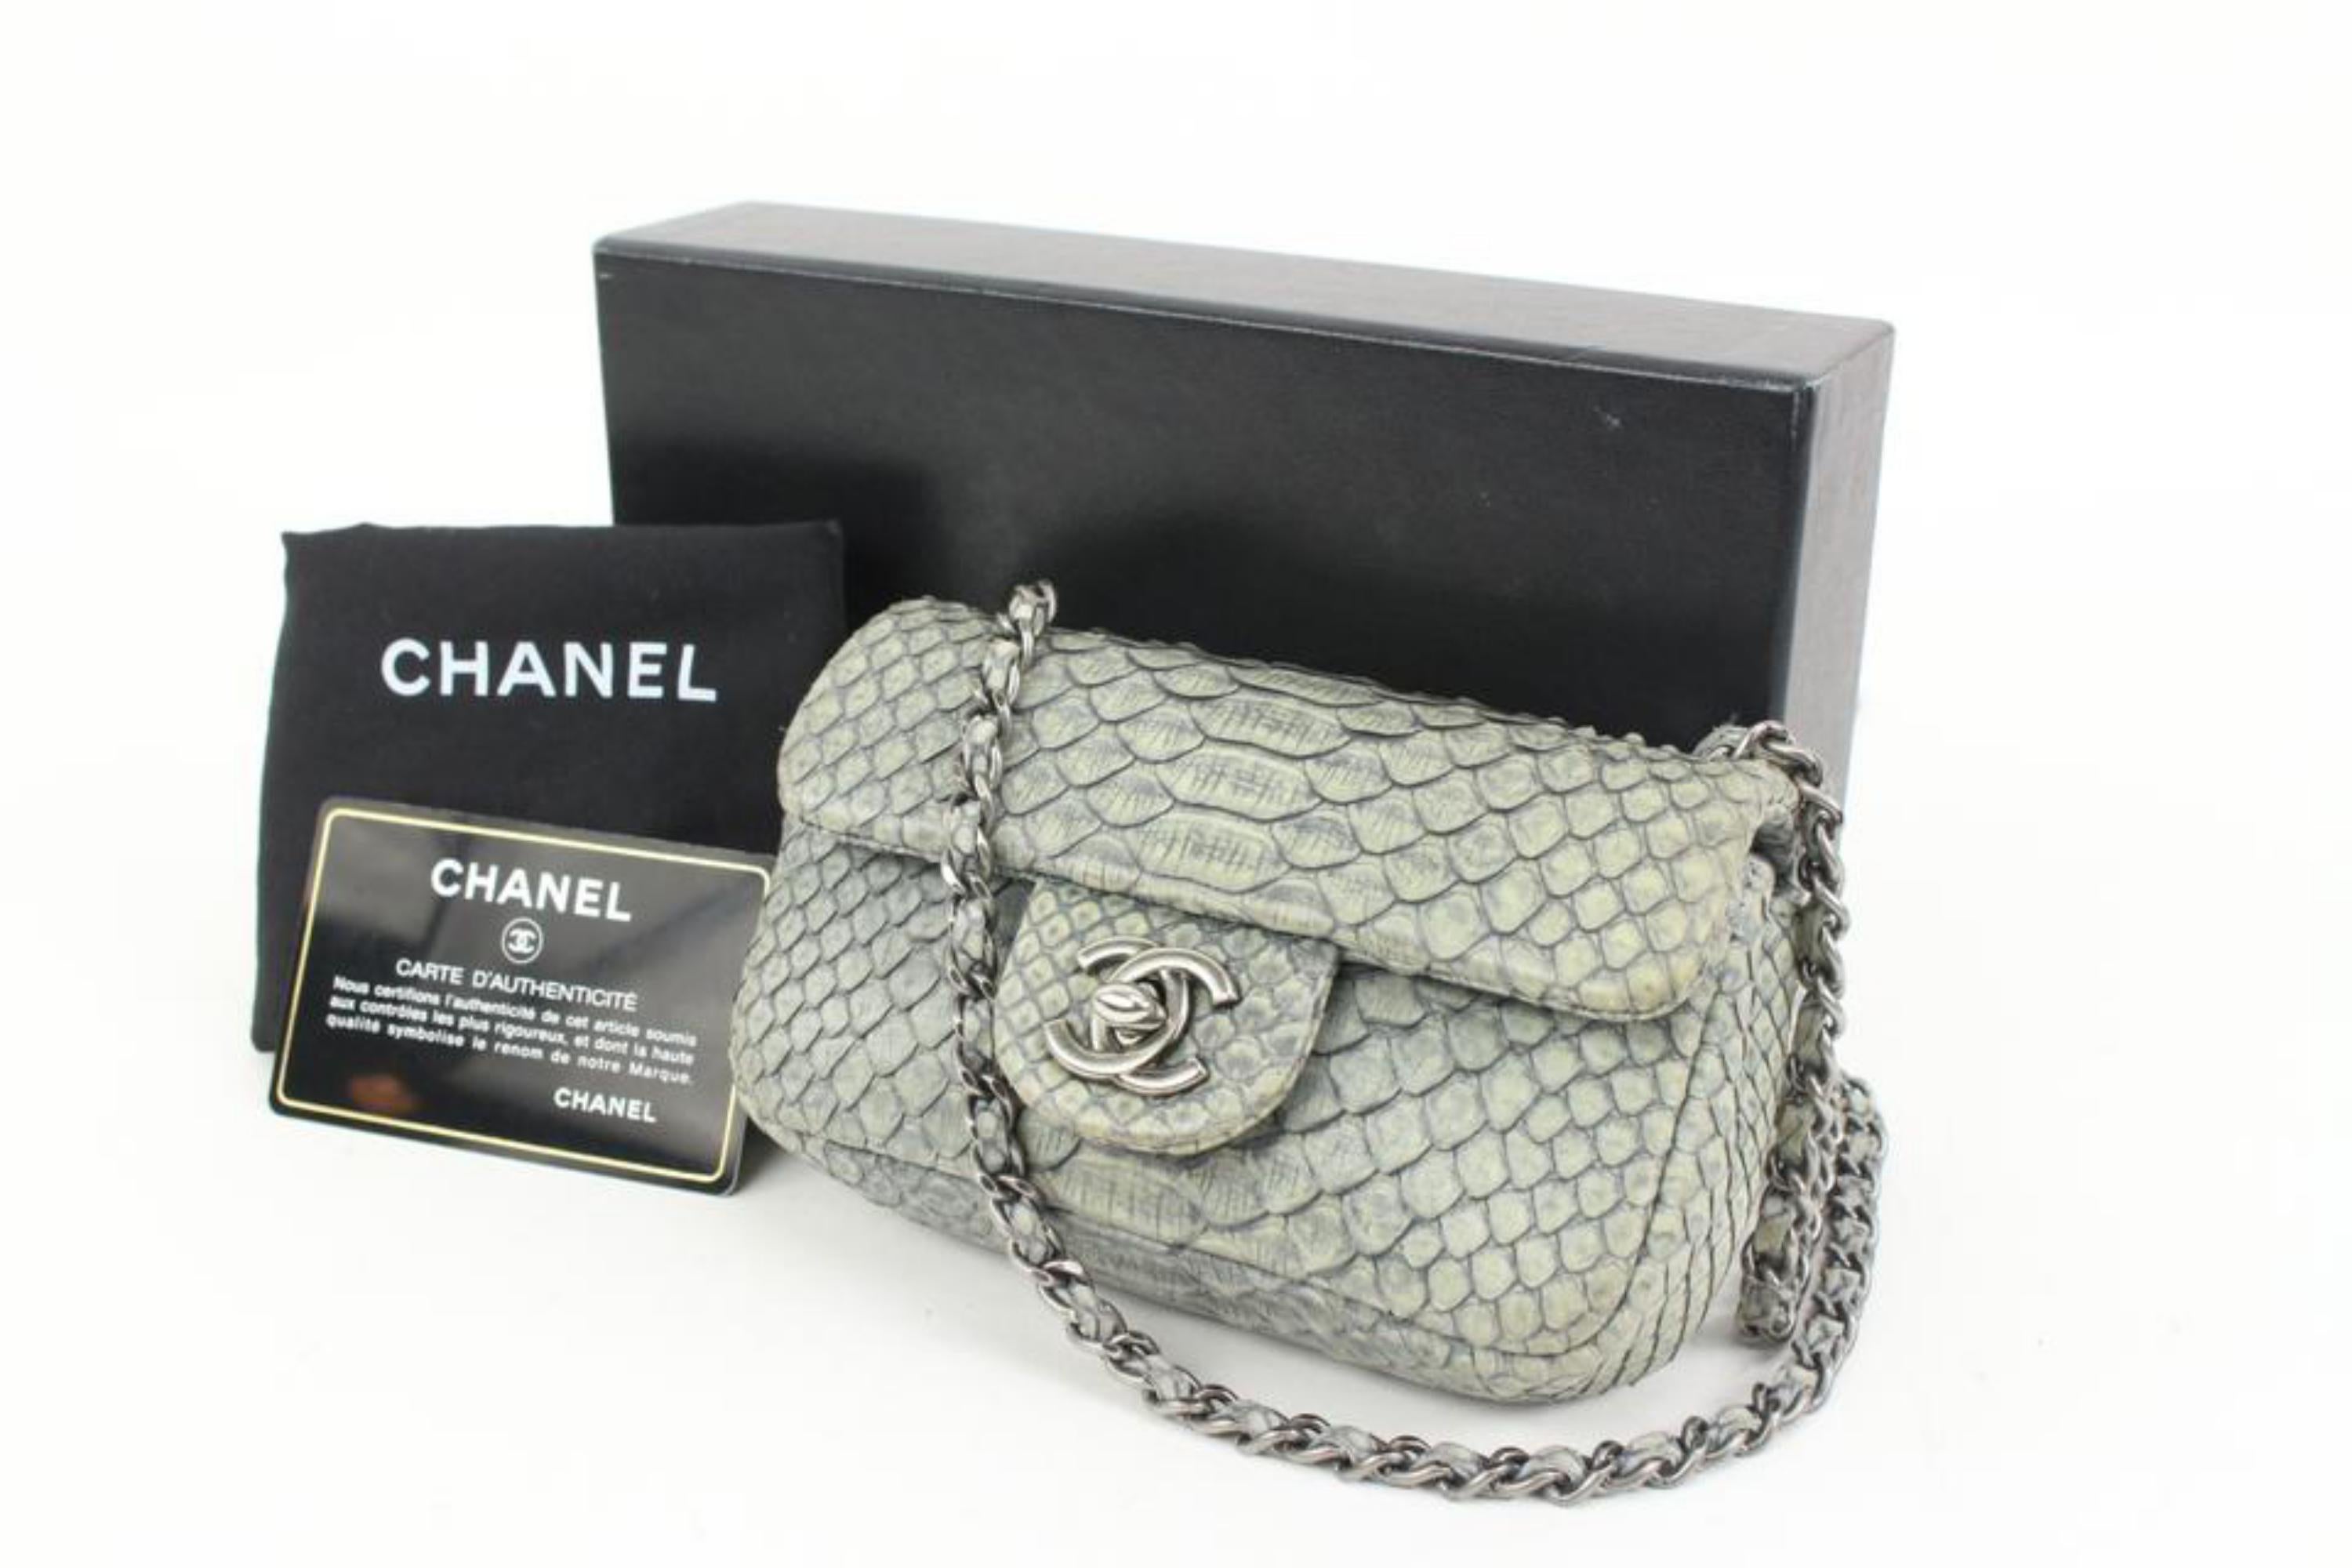 Chanel Grey Python Extra Mini Flassic Flap Crossbody Bag 41ck59
Date Code/Serial Number: 16005199
Made In: France
Measurements: Length:  5.4